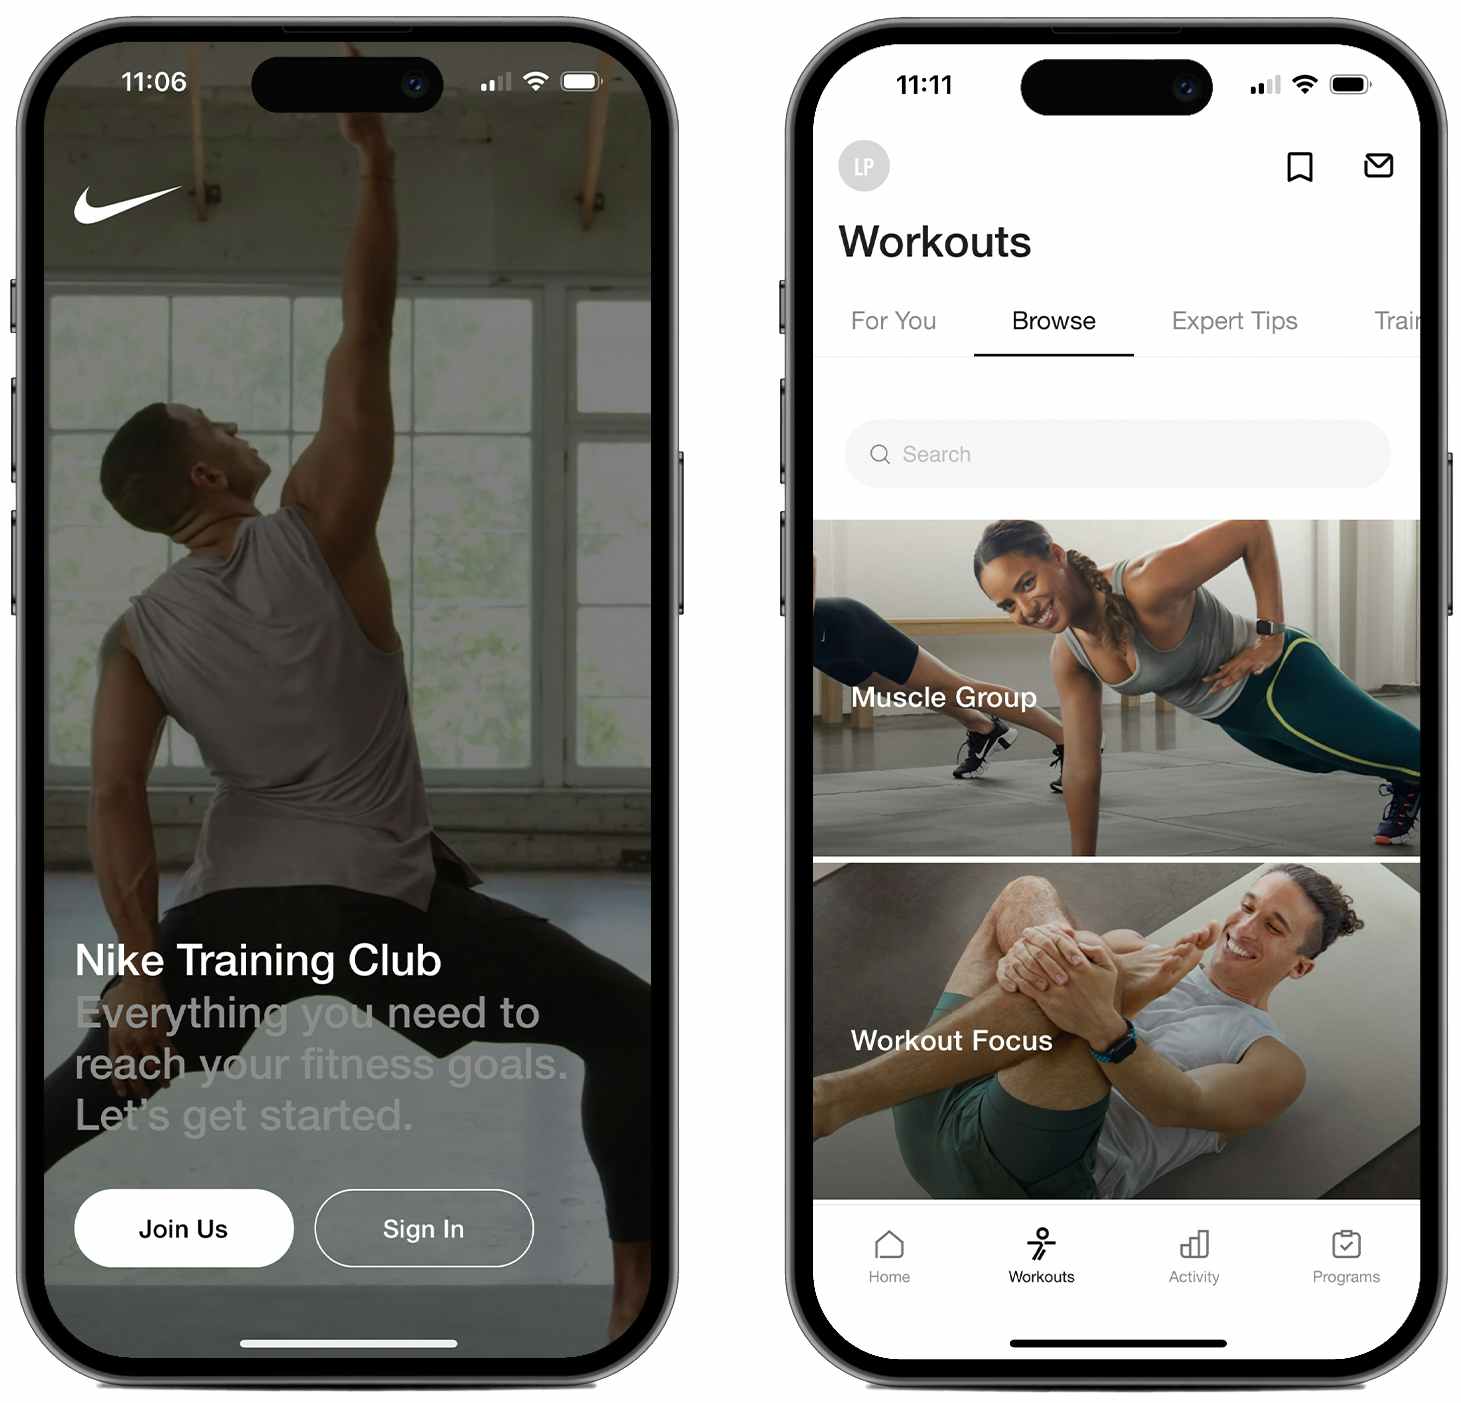 Screenshots from the Nike Workout Training Club fitness app on two iPhone screens